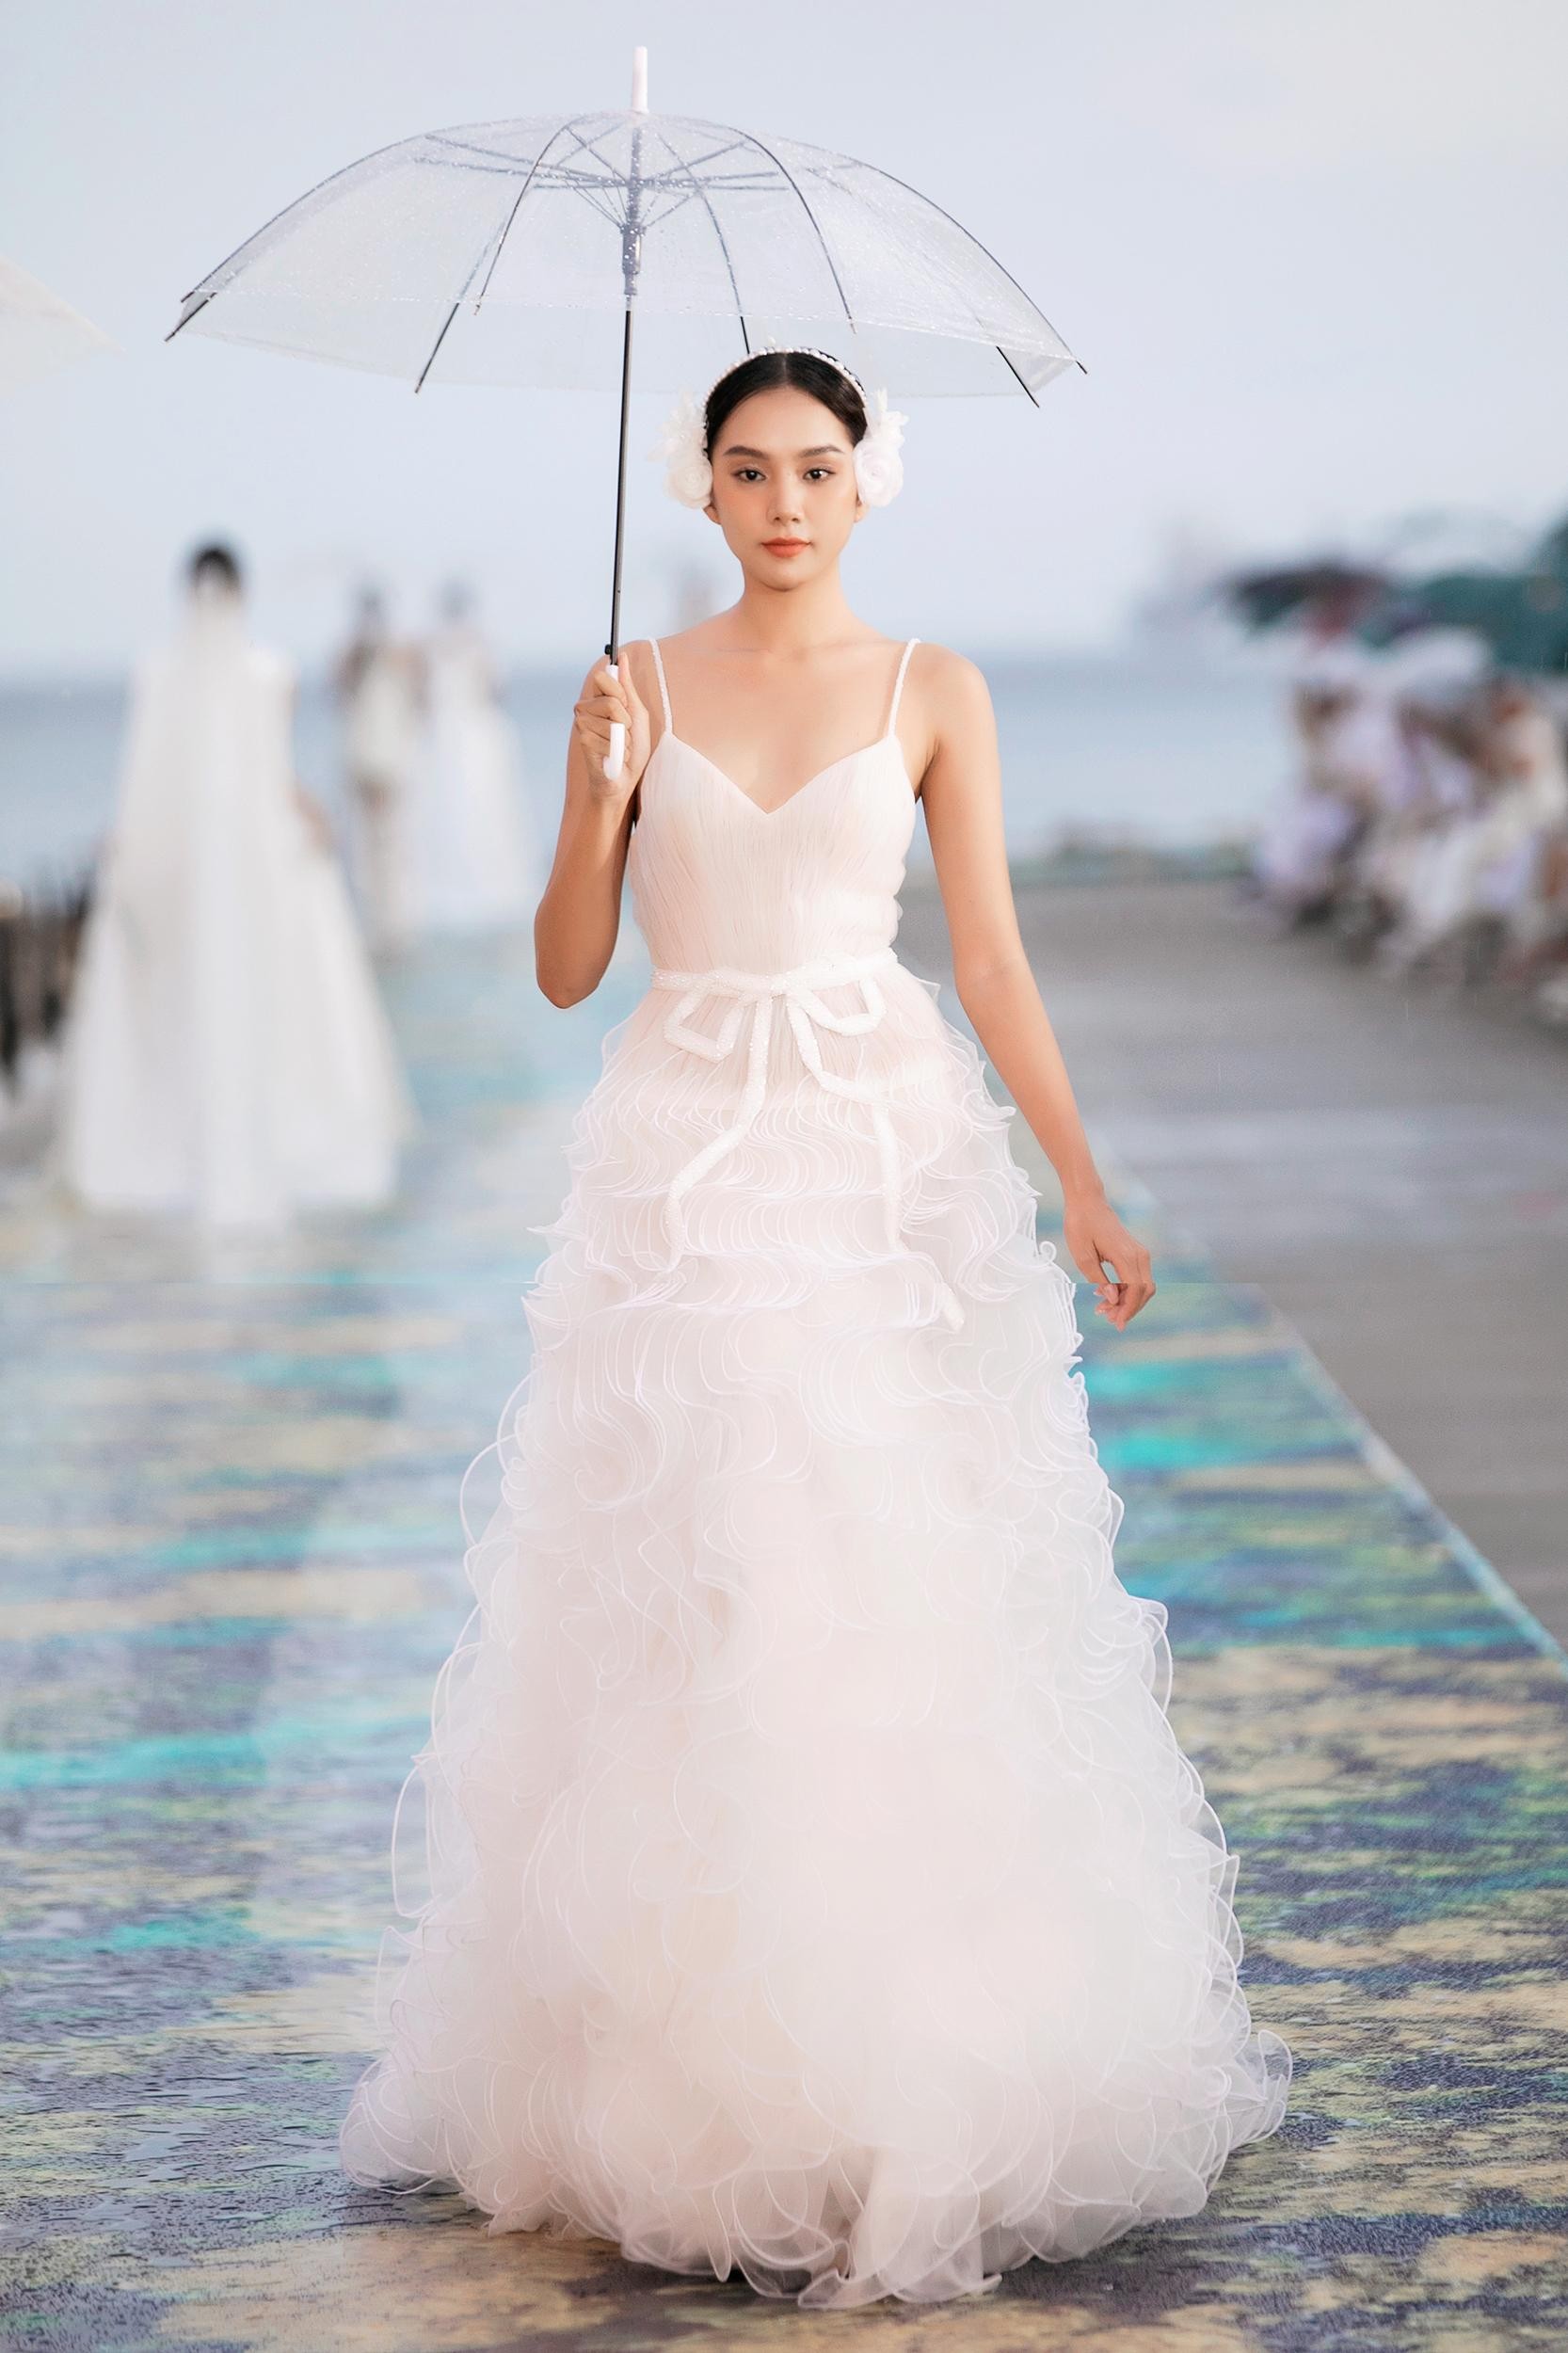 Miss Tieu Vy - Runner-up Phuong Anh transforms into a charming bride, competing in the catwalk in the rain - Photo 12.